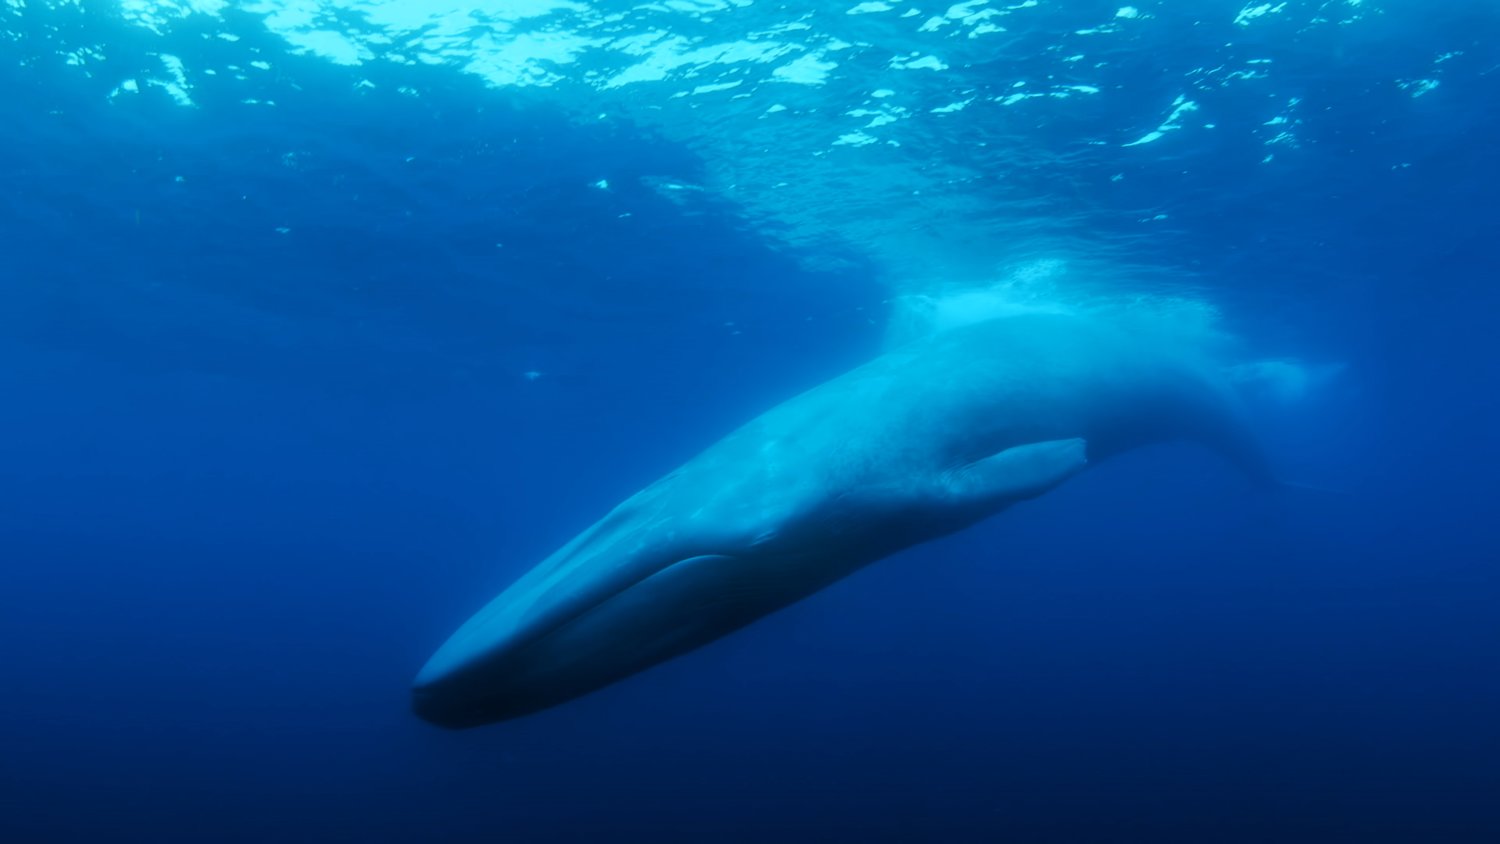 Josh Zeman’s “The Loneliest Whale” will screen at the Dreamland drive-in Friday and online through June 28 as part of the 2021 Nantucket Film Festival.